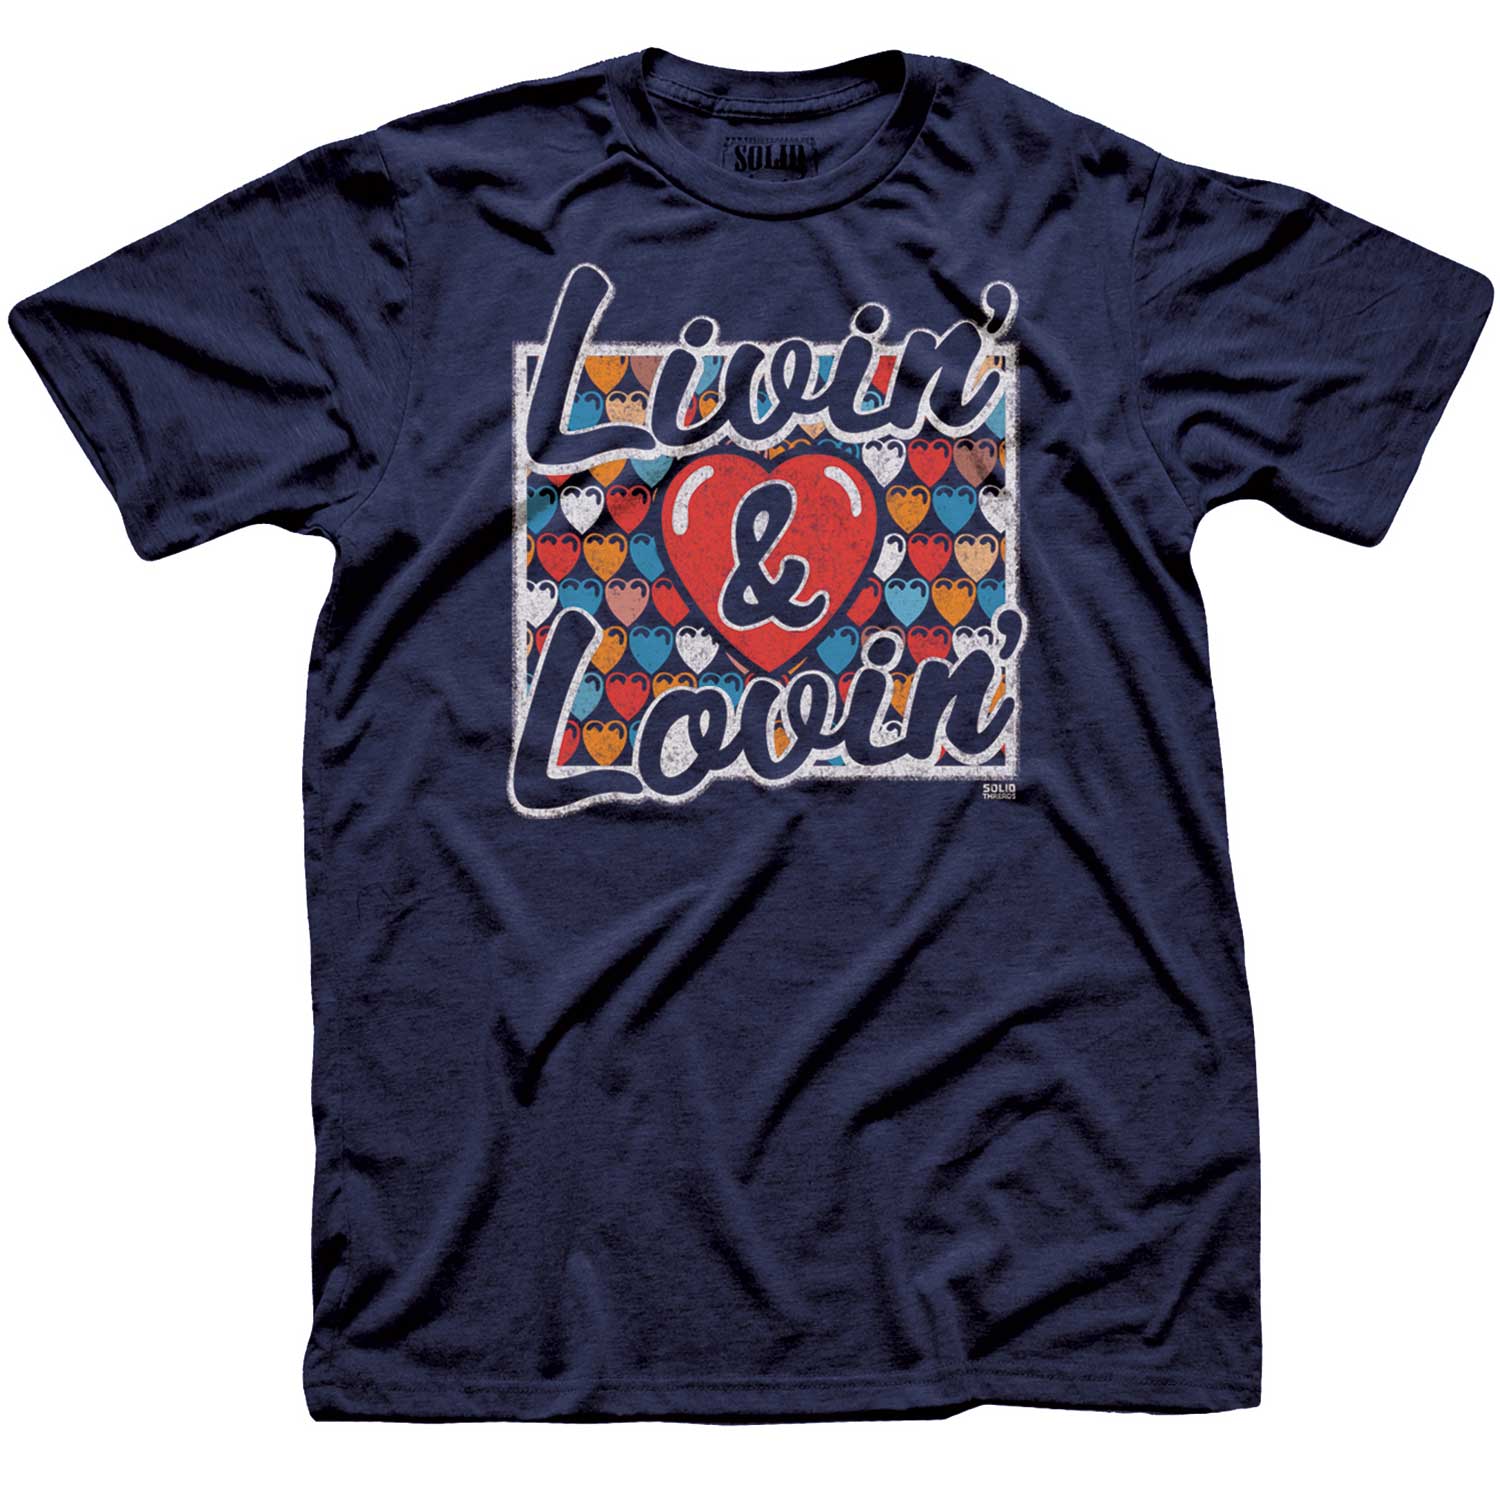 Men's Livin & Lovin Vintage Music Graphic Tee | Cool 80s Classic Rock T-shirt | Solid Threads